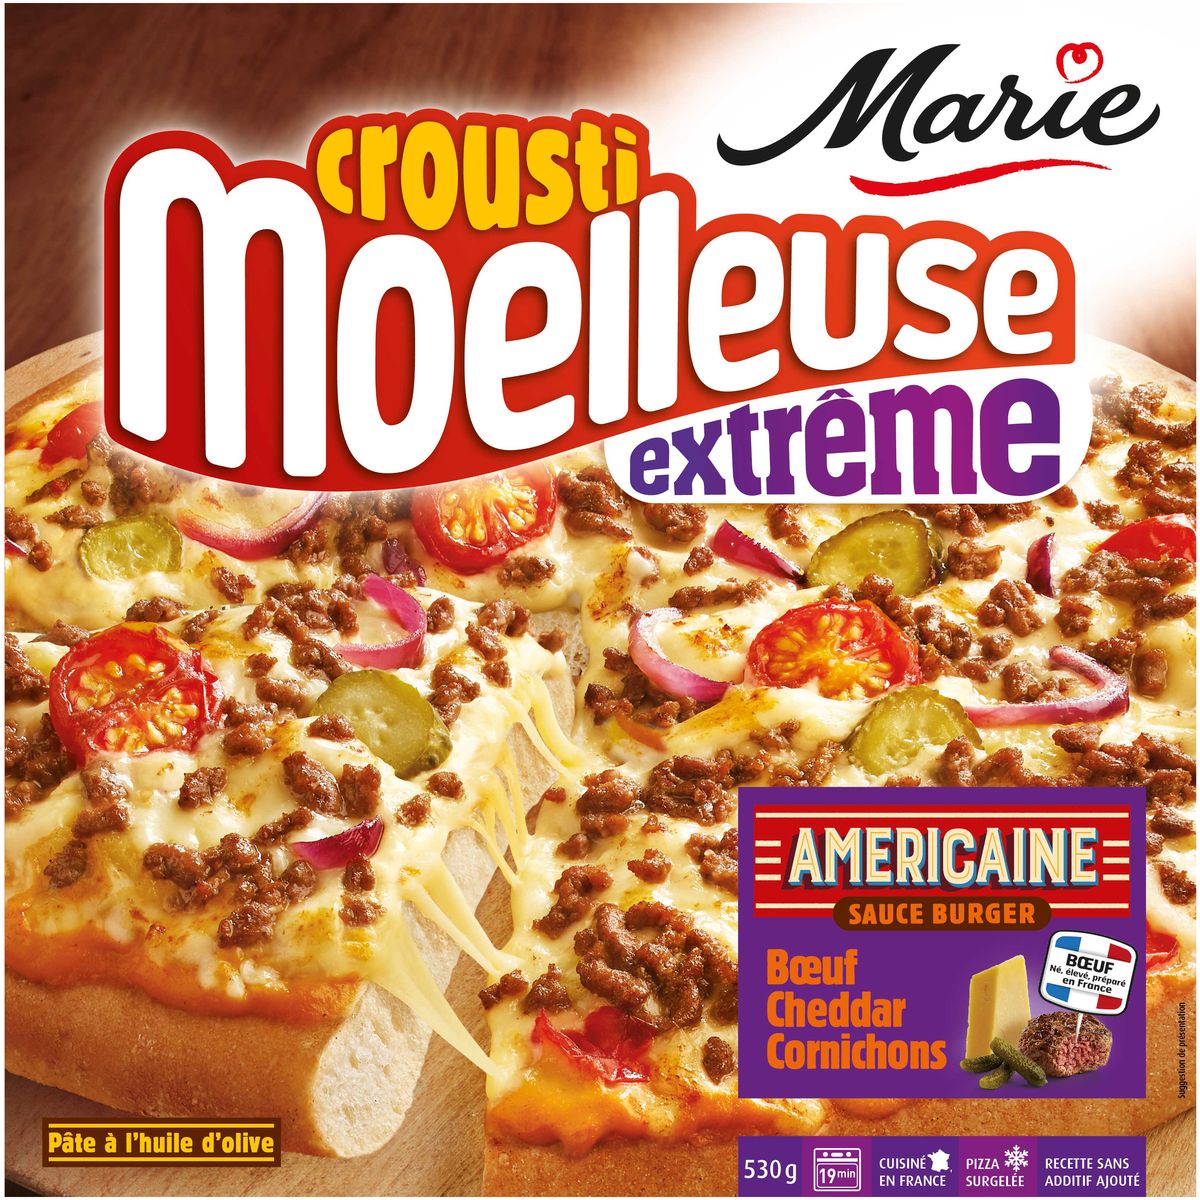 Marie Pizza L Americaine Crousti Moelleuse Extreme Boeuf Cheddar